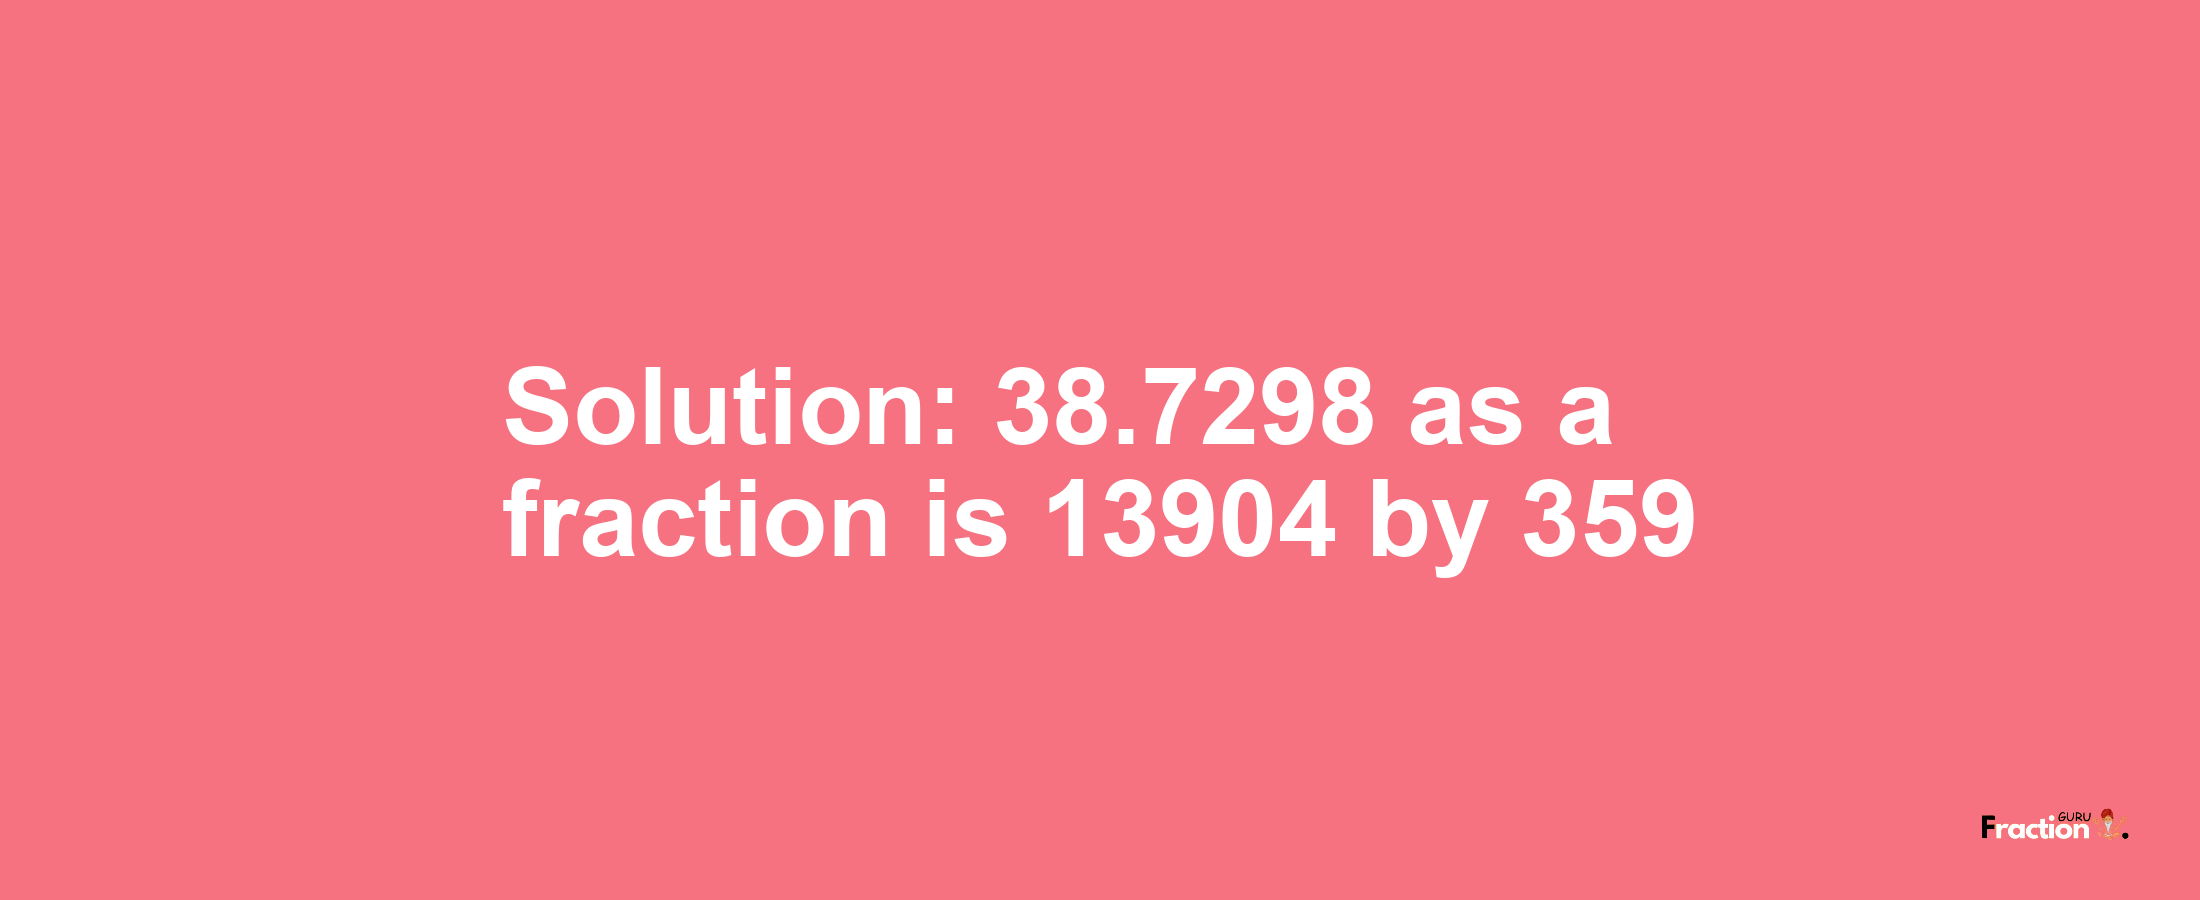 Solution:38.7298 as a fraction is 13904/359